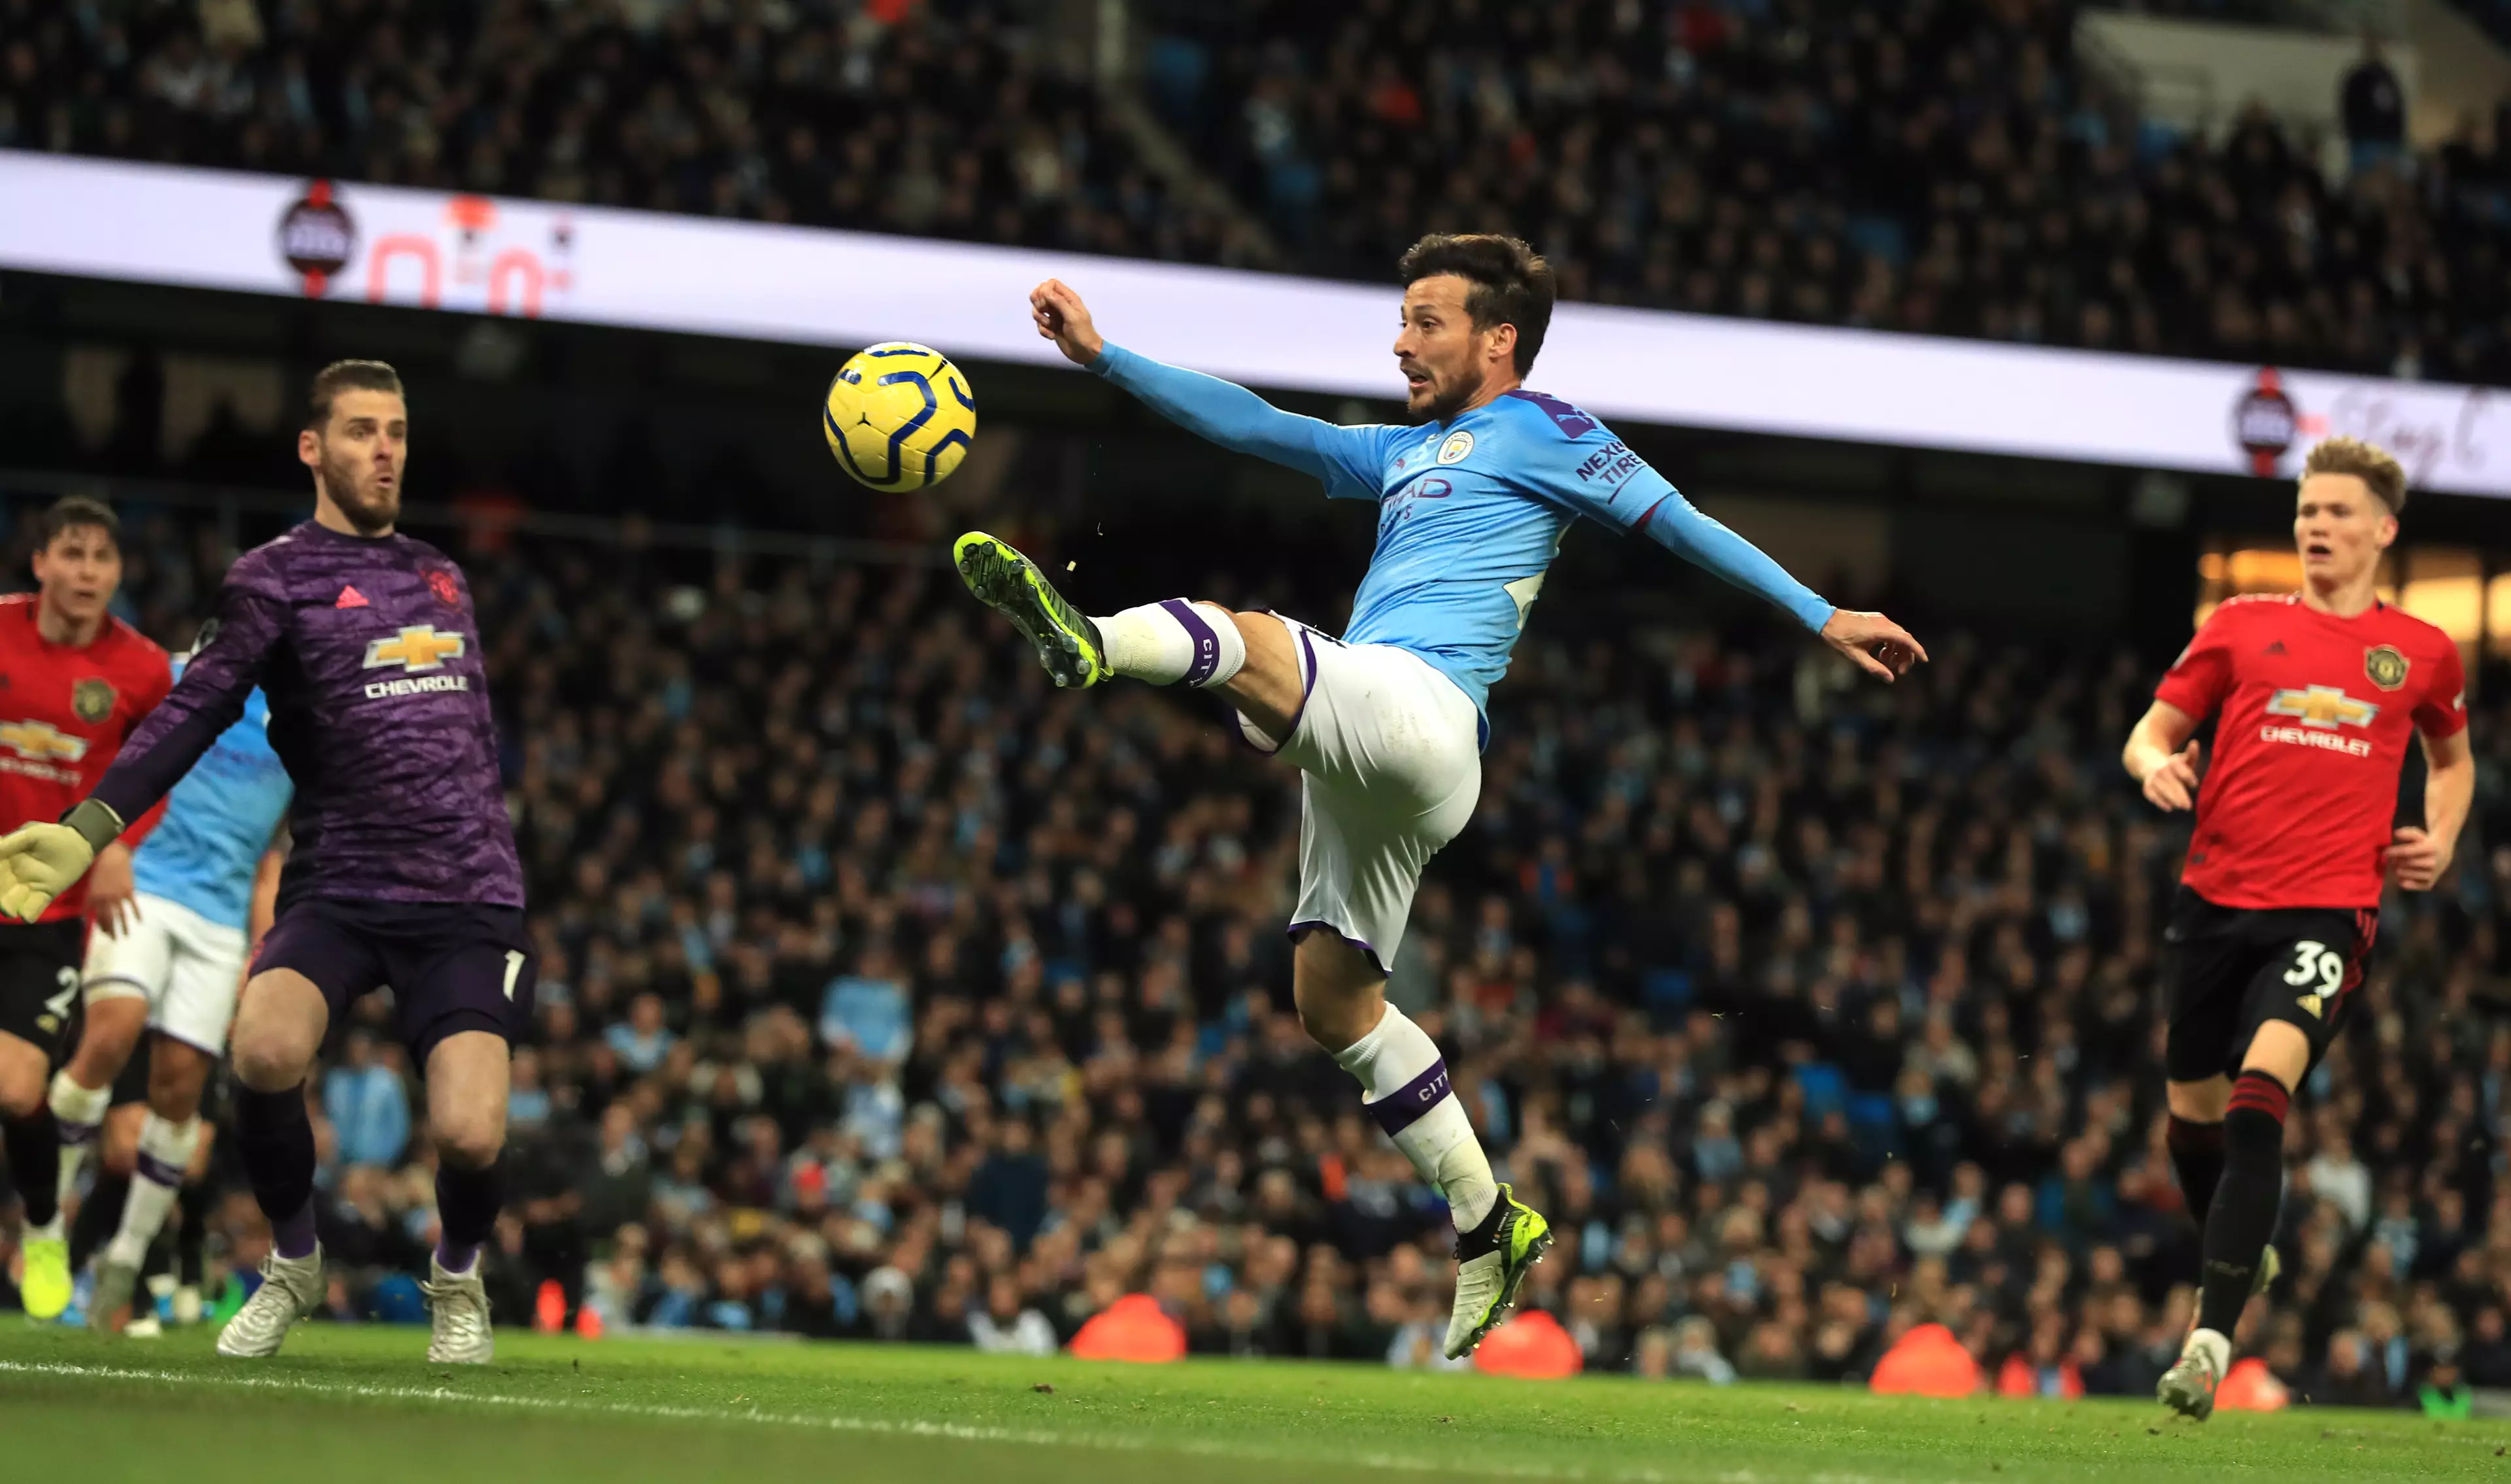 Man City playmaker David Silva came in third place in the list